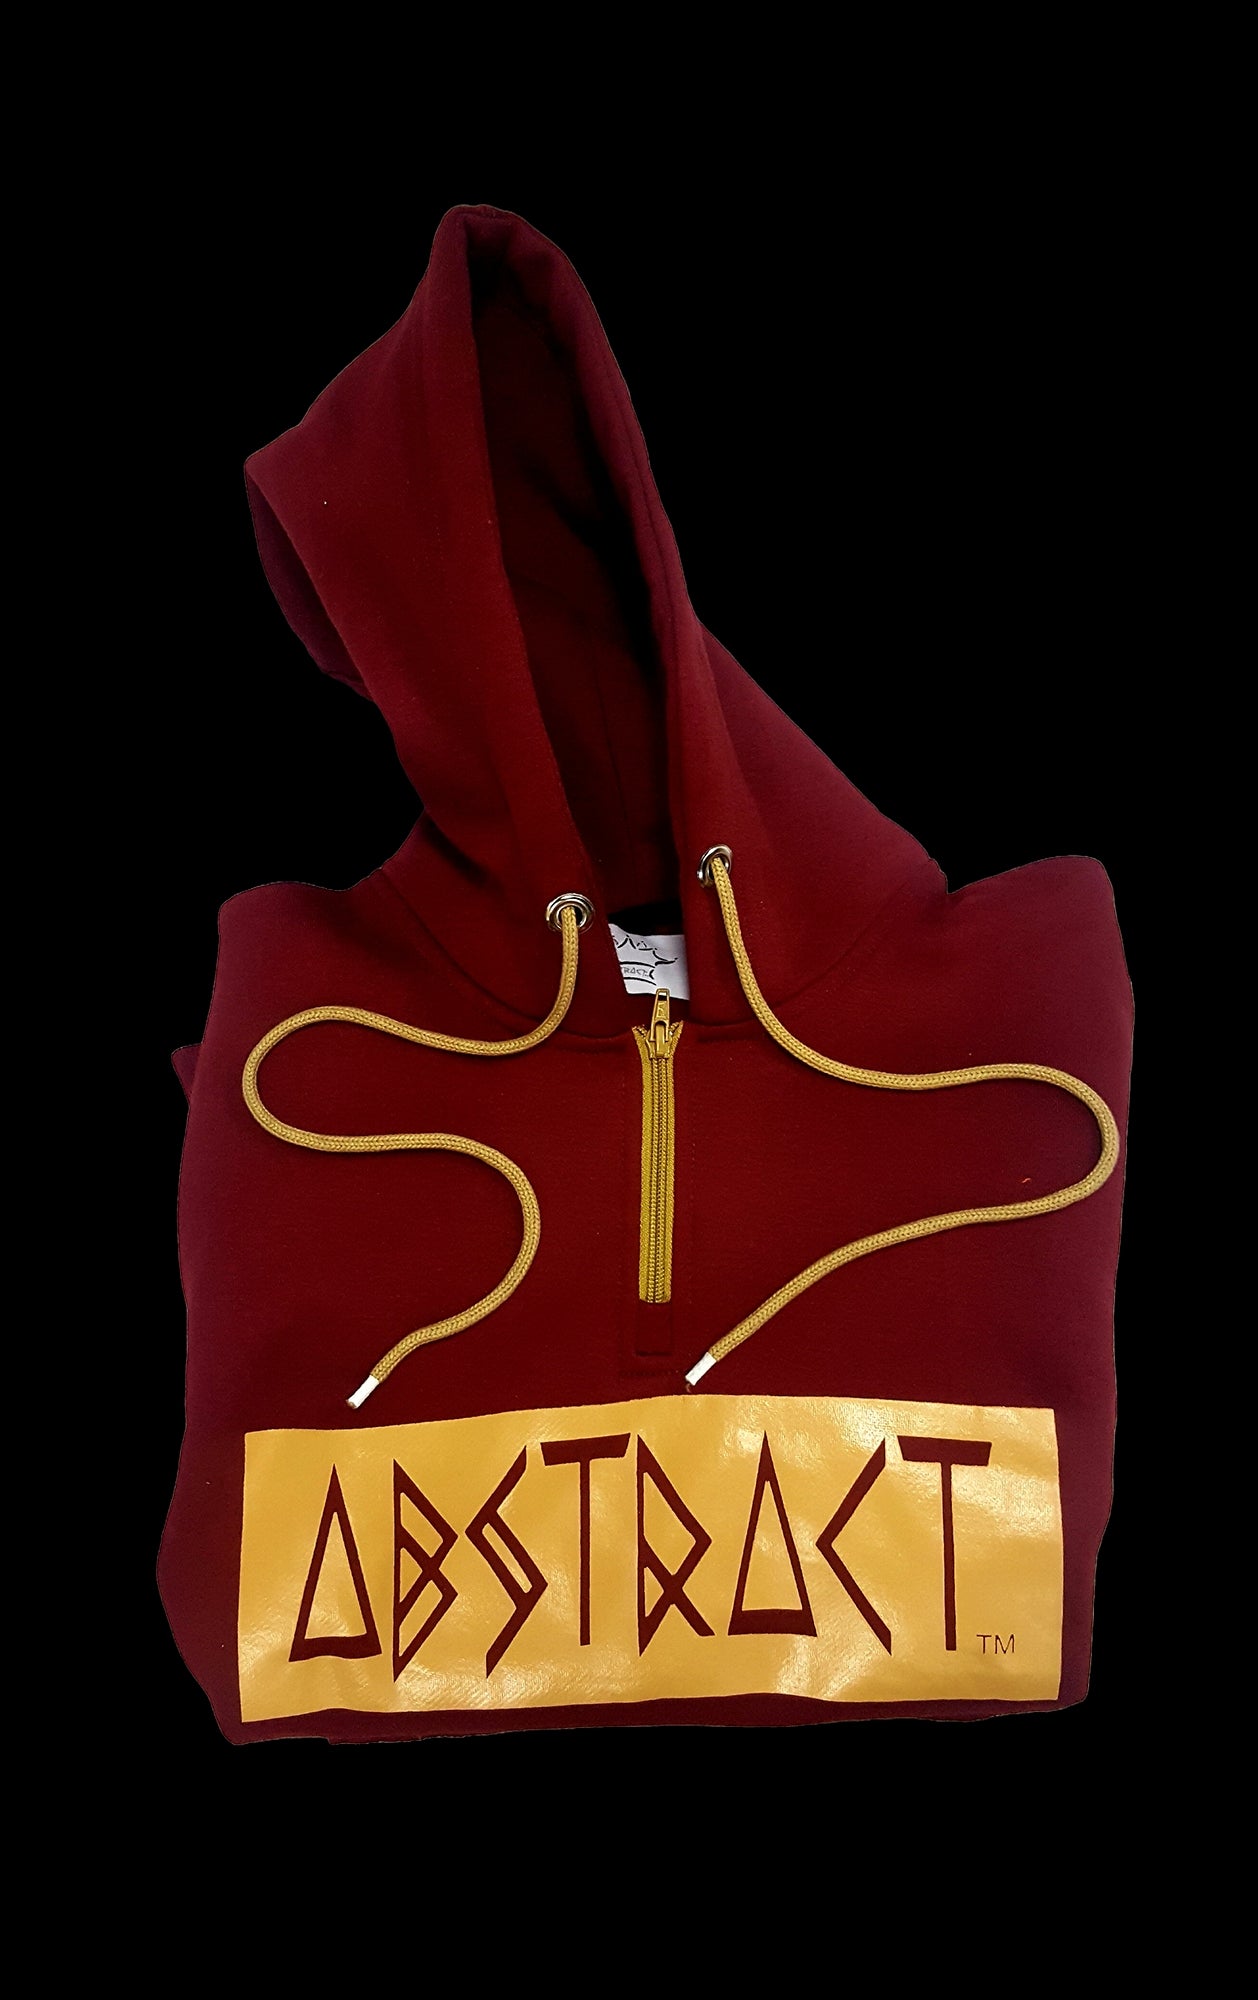 Overkill Hoodie Overkill Hoodie Small / Cotton/polyester fleece blend / Burgundy/Gold,Large / Cotton/polyester fleece blend / Burgundy/Gold,Medium / Cotton/polyester fleece blend / Burgundy/Gold,XL / Cotton/polyester fleece blend / Burgundy/Gold,2XL / Cotton/polyester fleece blend / Burgundy/Gold,3XL / Cotton/polyester fleece blend / Burgundy/Gold Sandy Brown